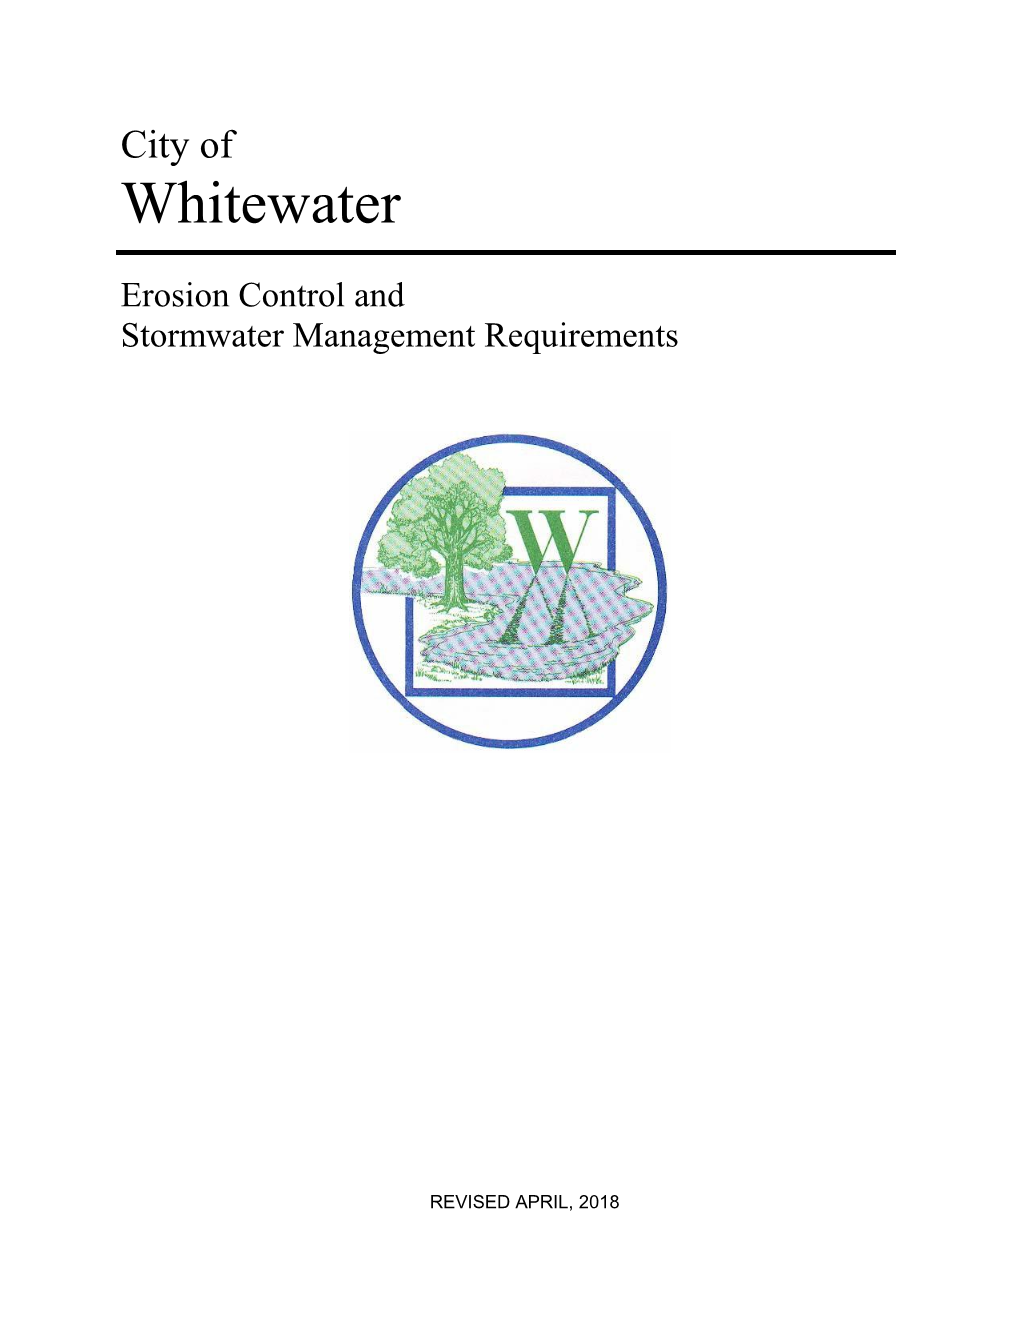 Erosion Control and Stormwater Management Requirements